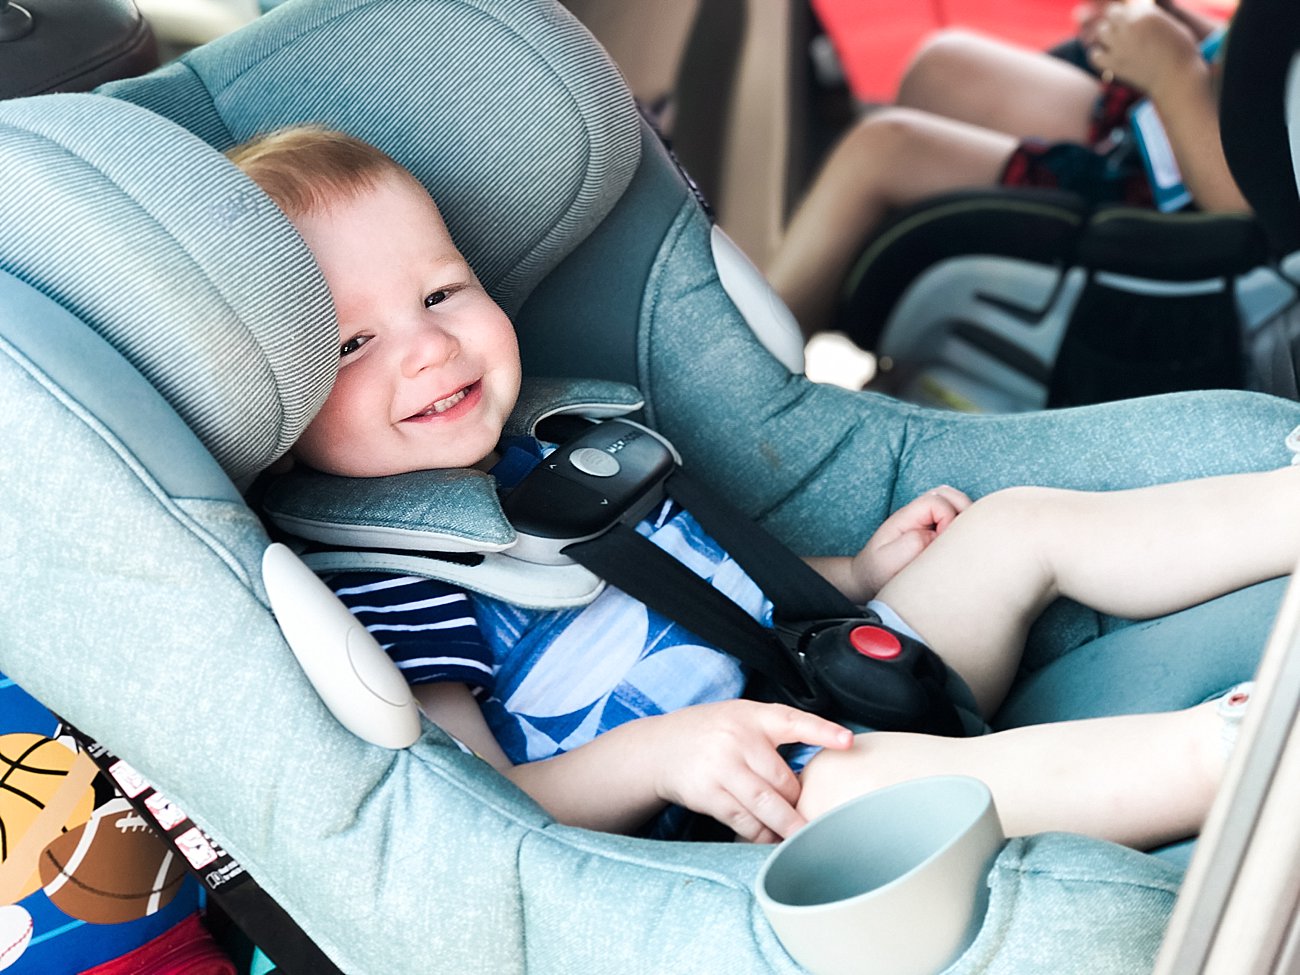 Maxi Cosi Pria ™ 85 Max Convertible Car Seat Review by NC blogger Still Being Molly